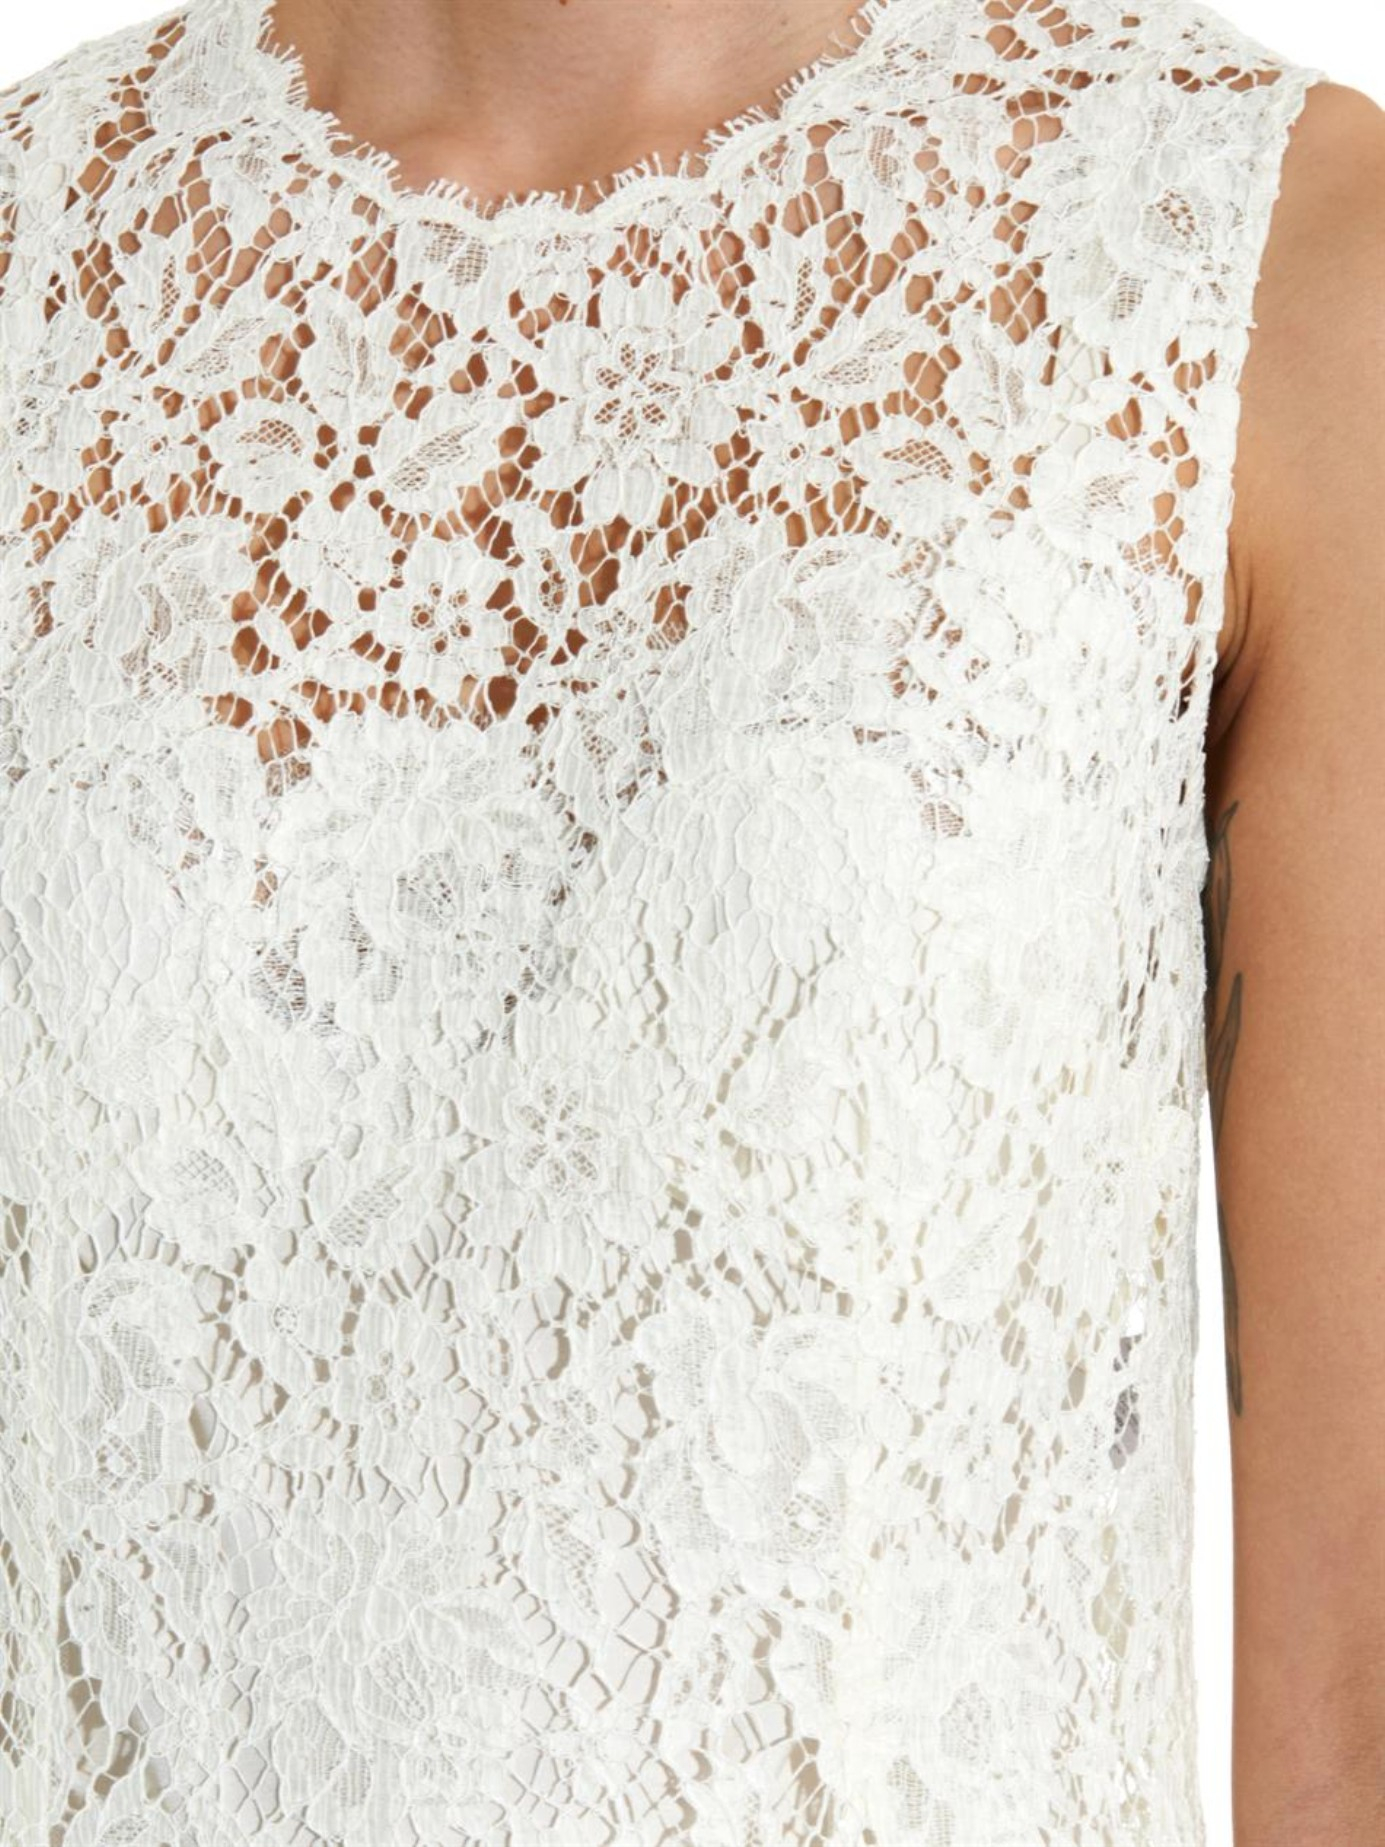 Dolce & gabbana Sleeveless Lace Top in White | Lyst